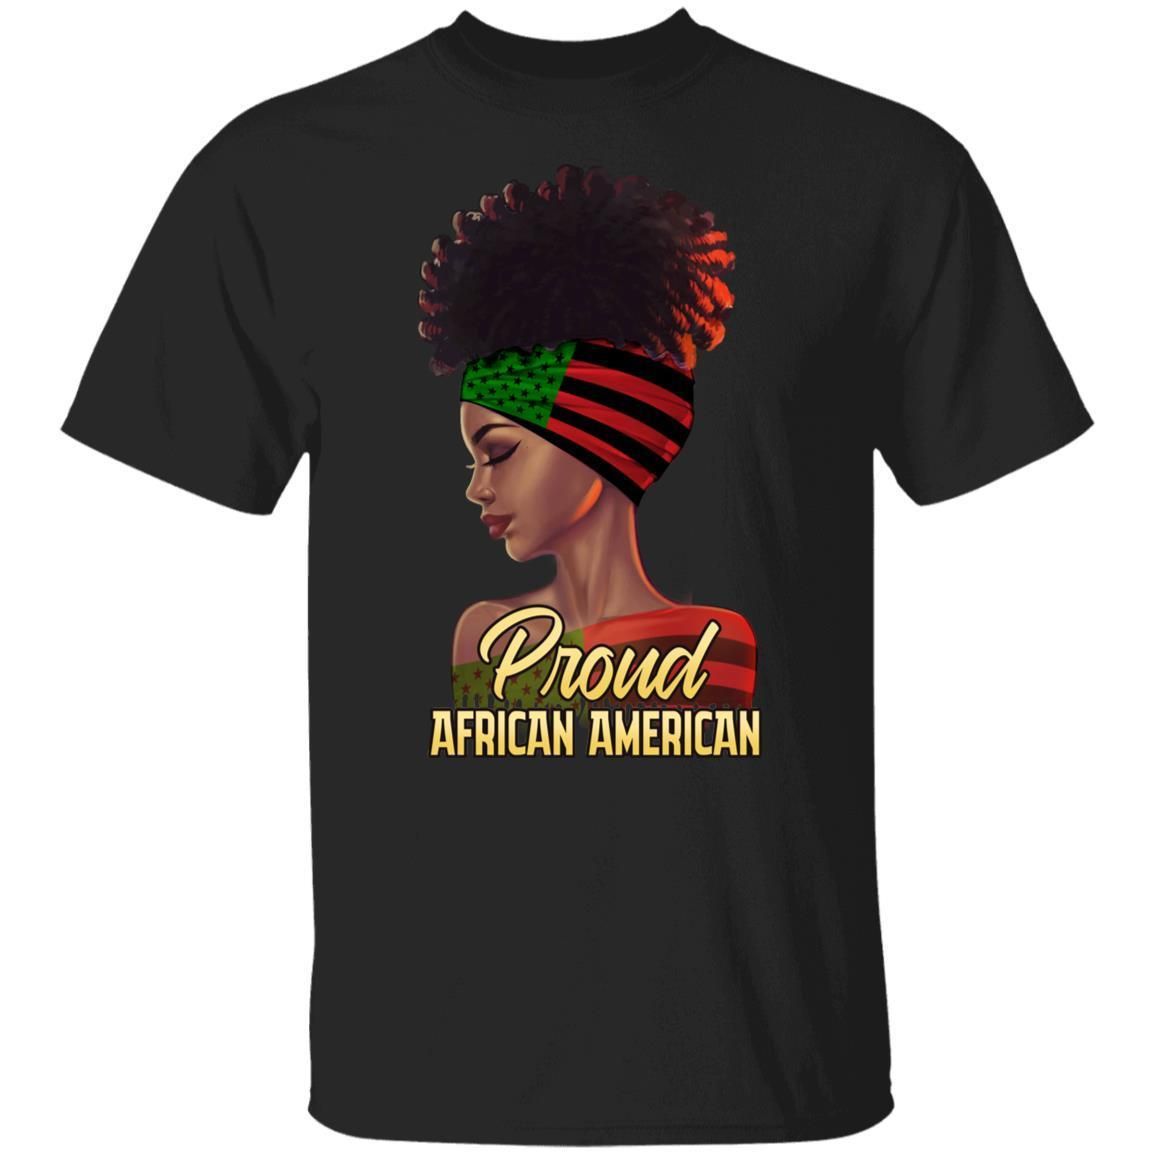 Proud African American T-Shirt